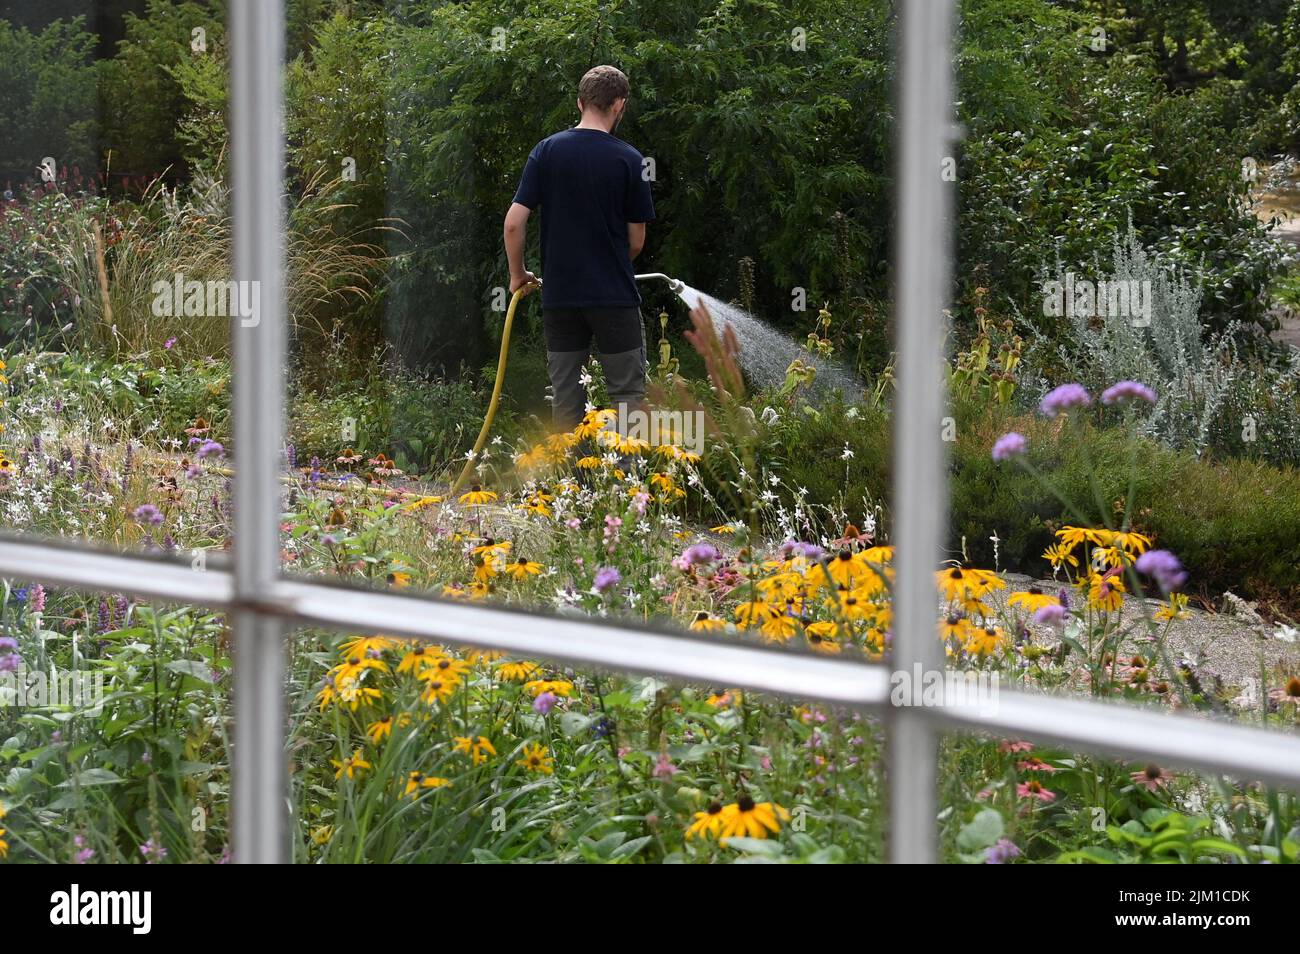 A worker waters plants in a public park, ahead of regional restrictions for private and residential water usage being implemented, in London, Britain, August 4, 2022. REUTERS/Toby Melville Stock Photo